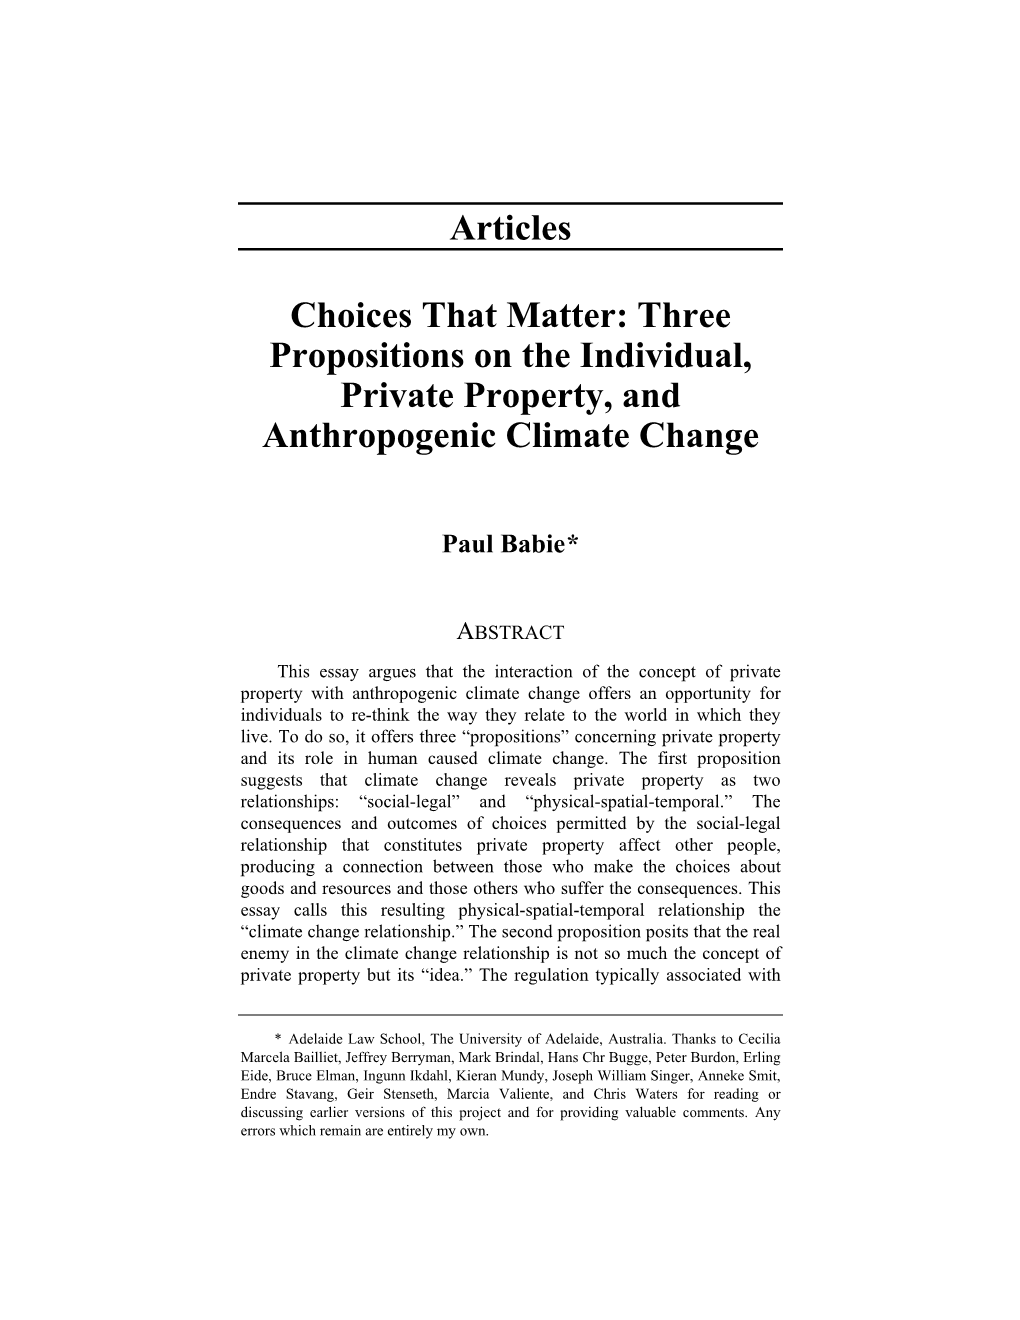 Three Propositions on the Individual, Private Property, and Anthropogenic Climate Change